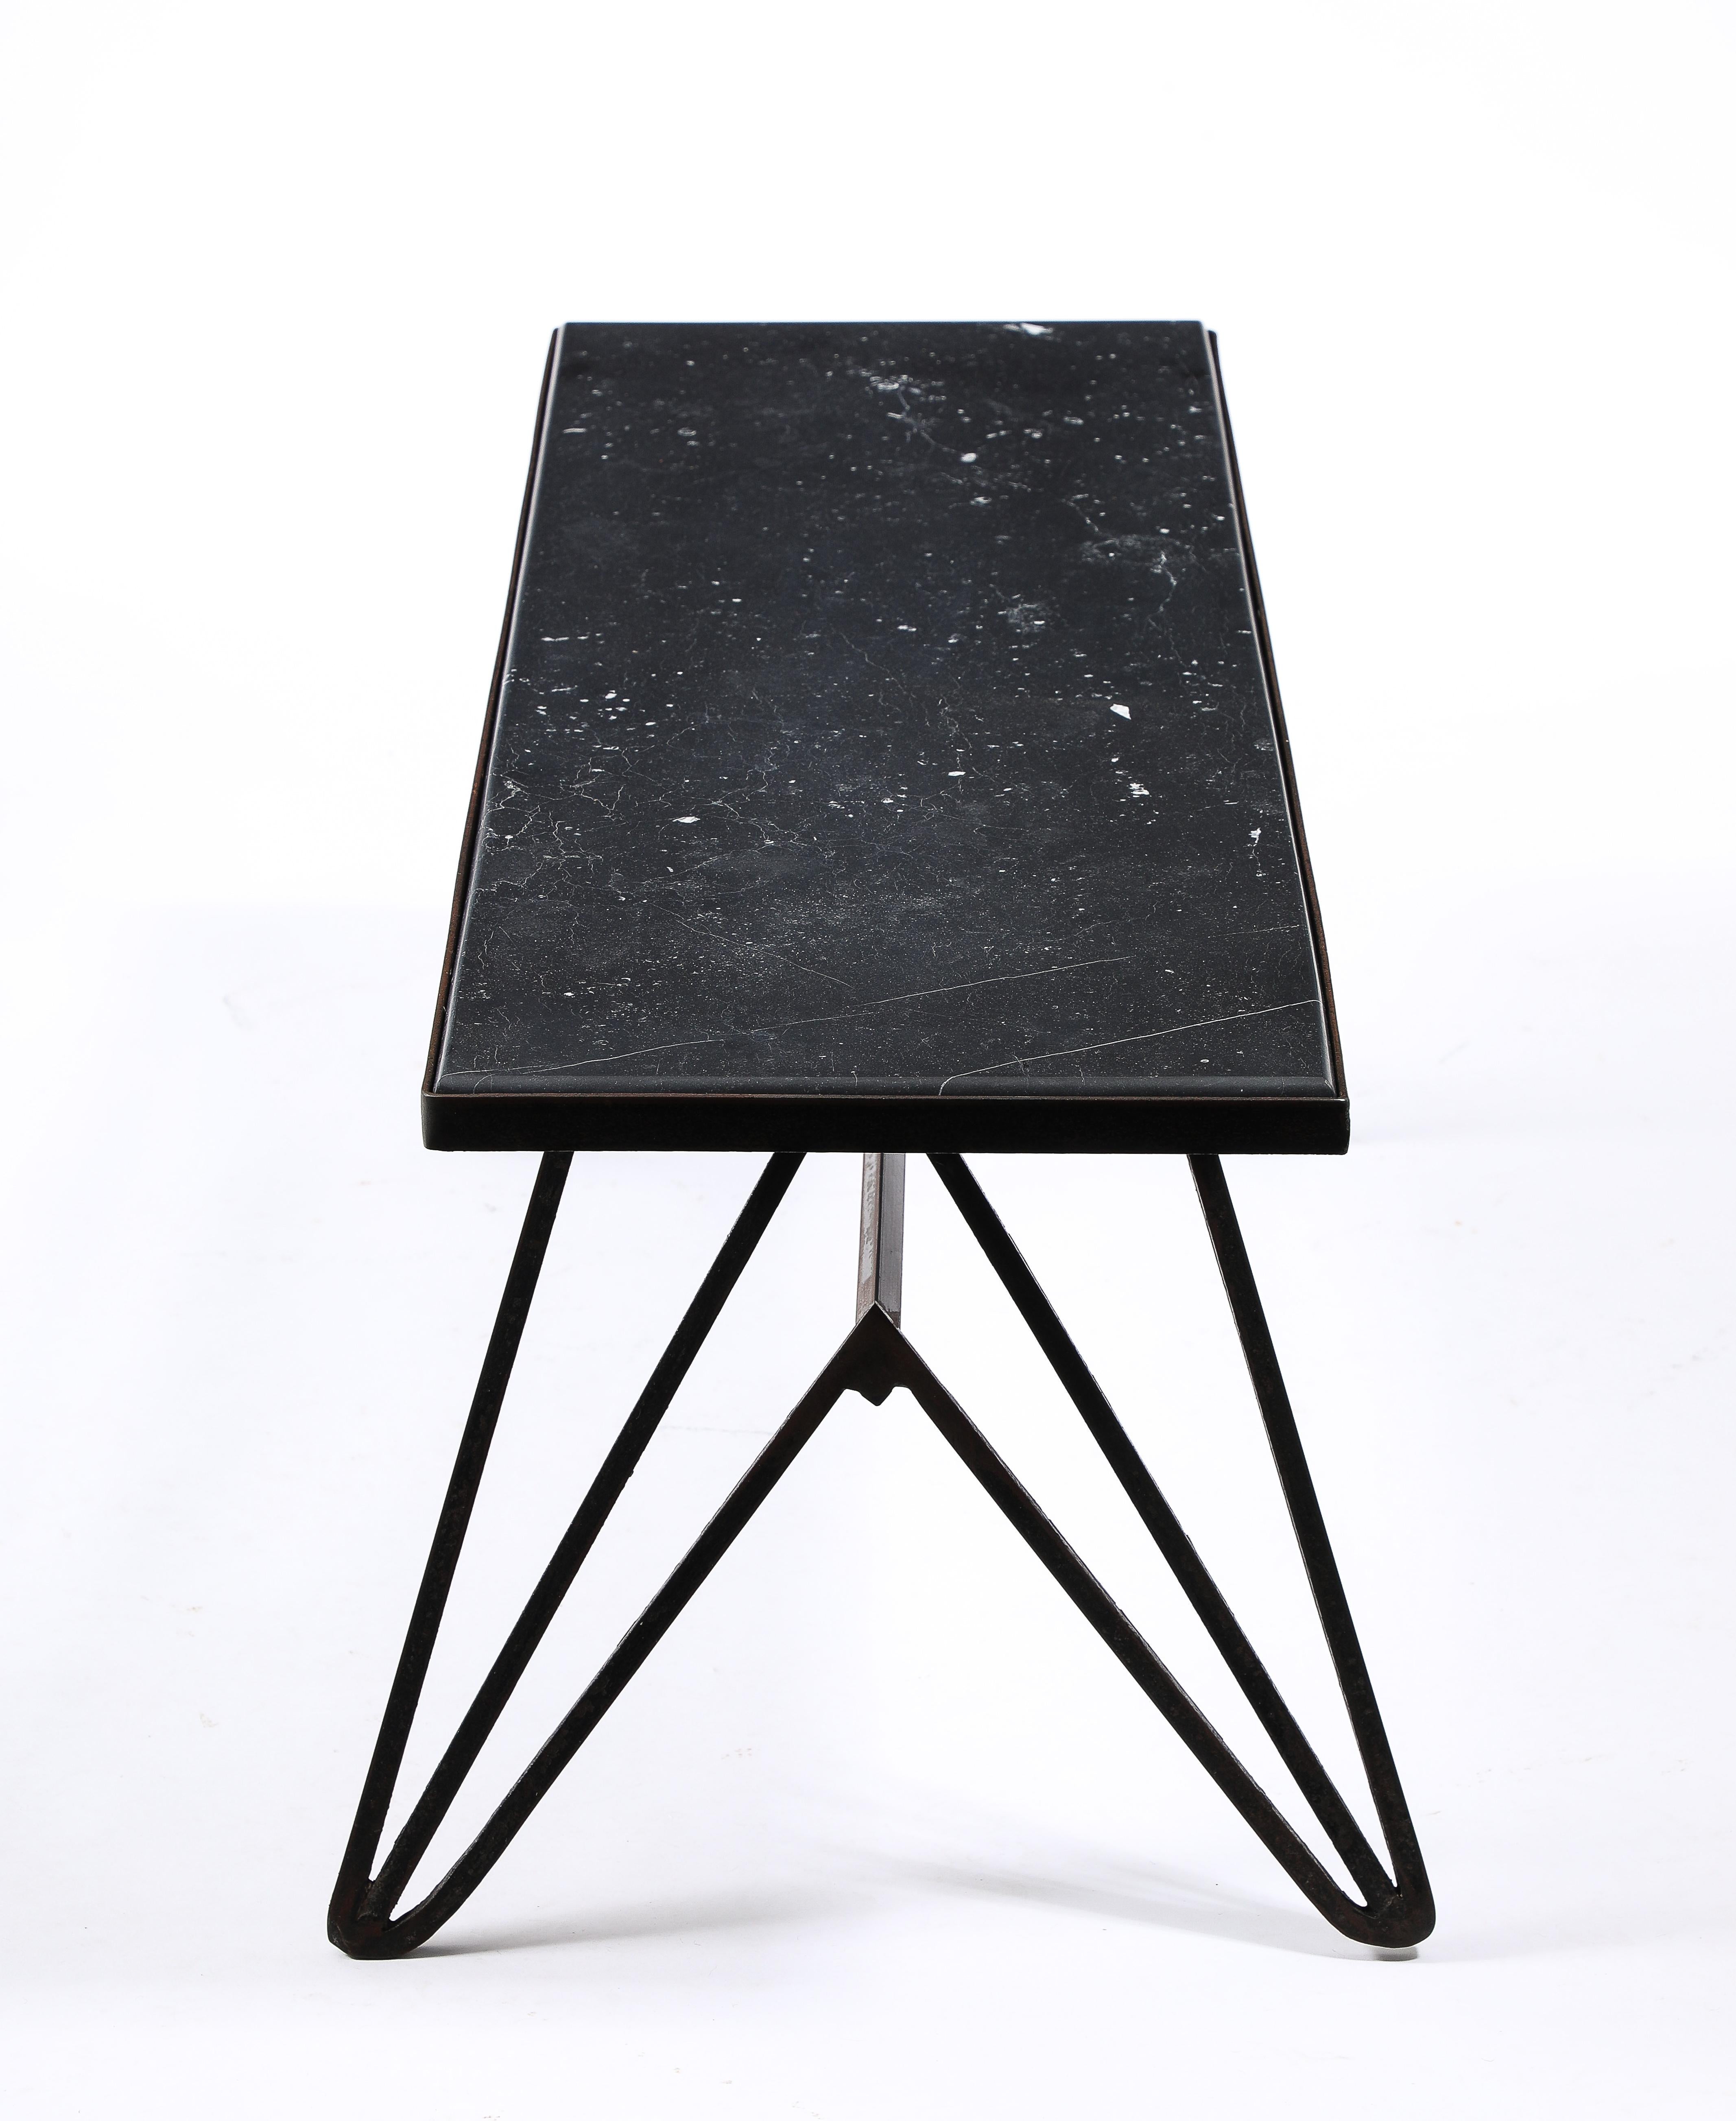 Honed Granite & Wrought Iron Coffee Table, France 1950's For Sale 9